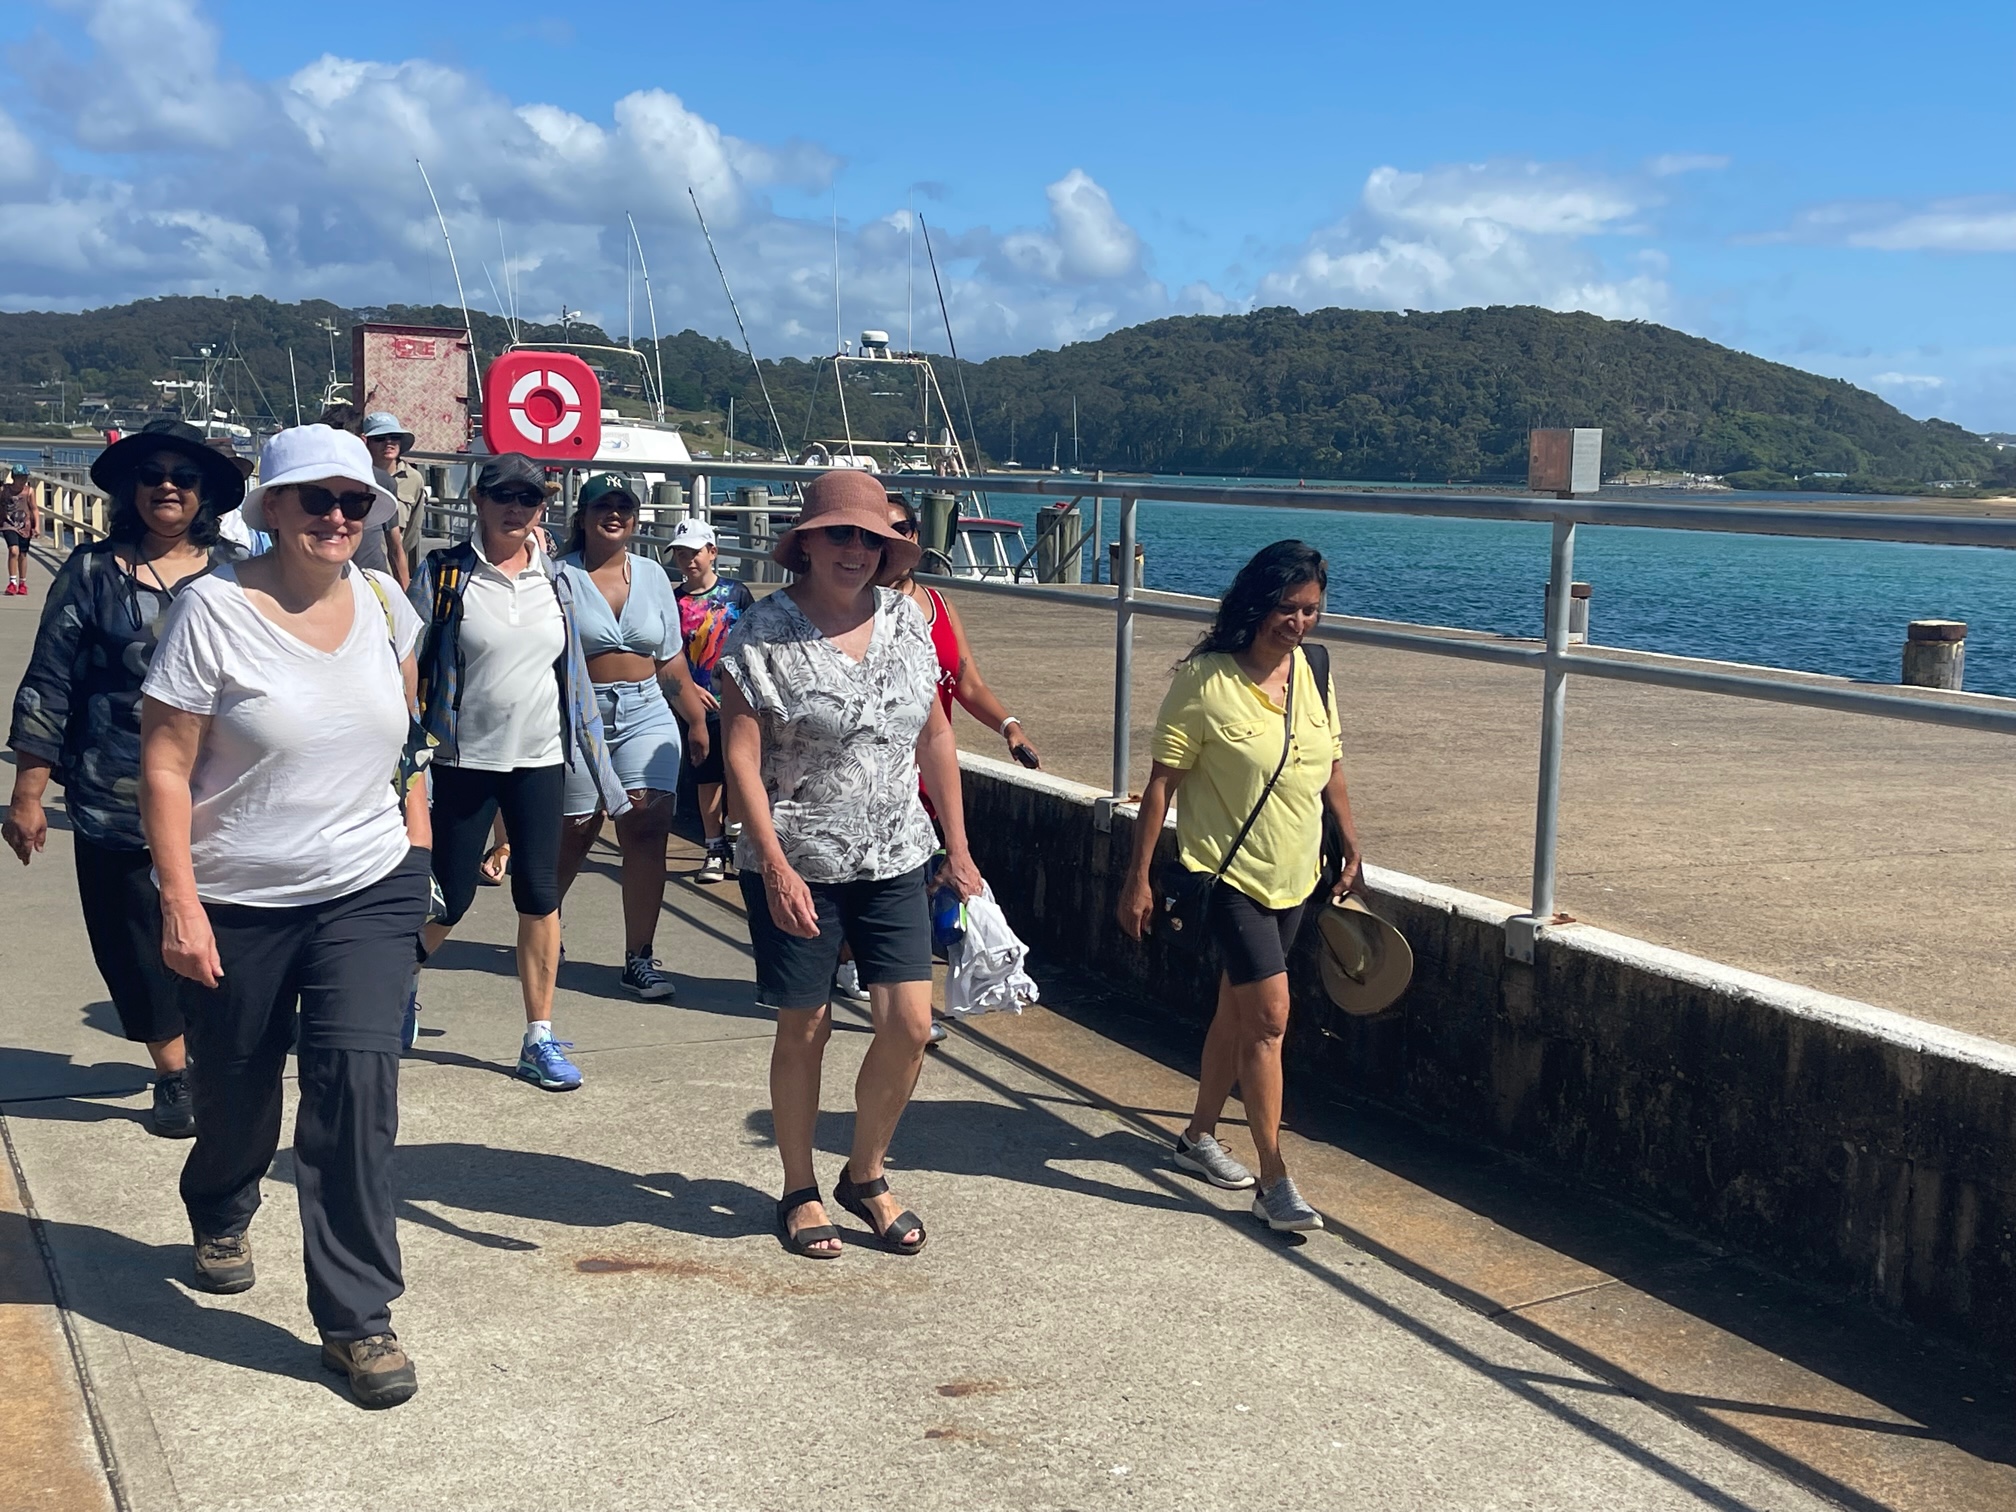 CONNECT TO COUNTRY  - STORYTELLING AND NAROOMA FORESHORE CULTURAL WALK WITH ABORIGINAL TRADITIONAL OWNER LYNNE THOMAS OF MALLEEMA ABORIGINAL CULTURAL TOURS